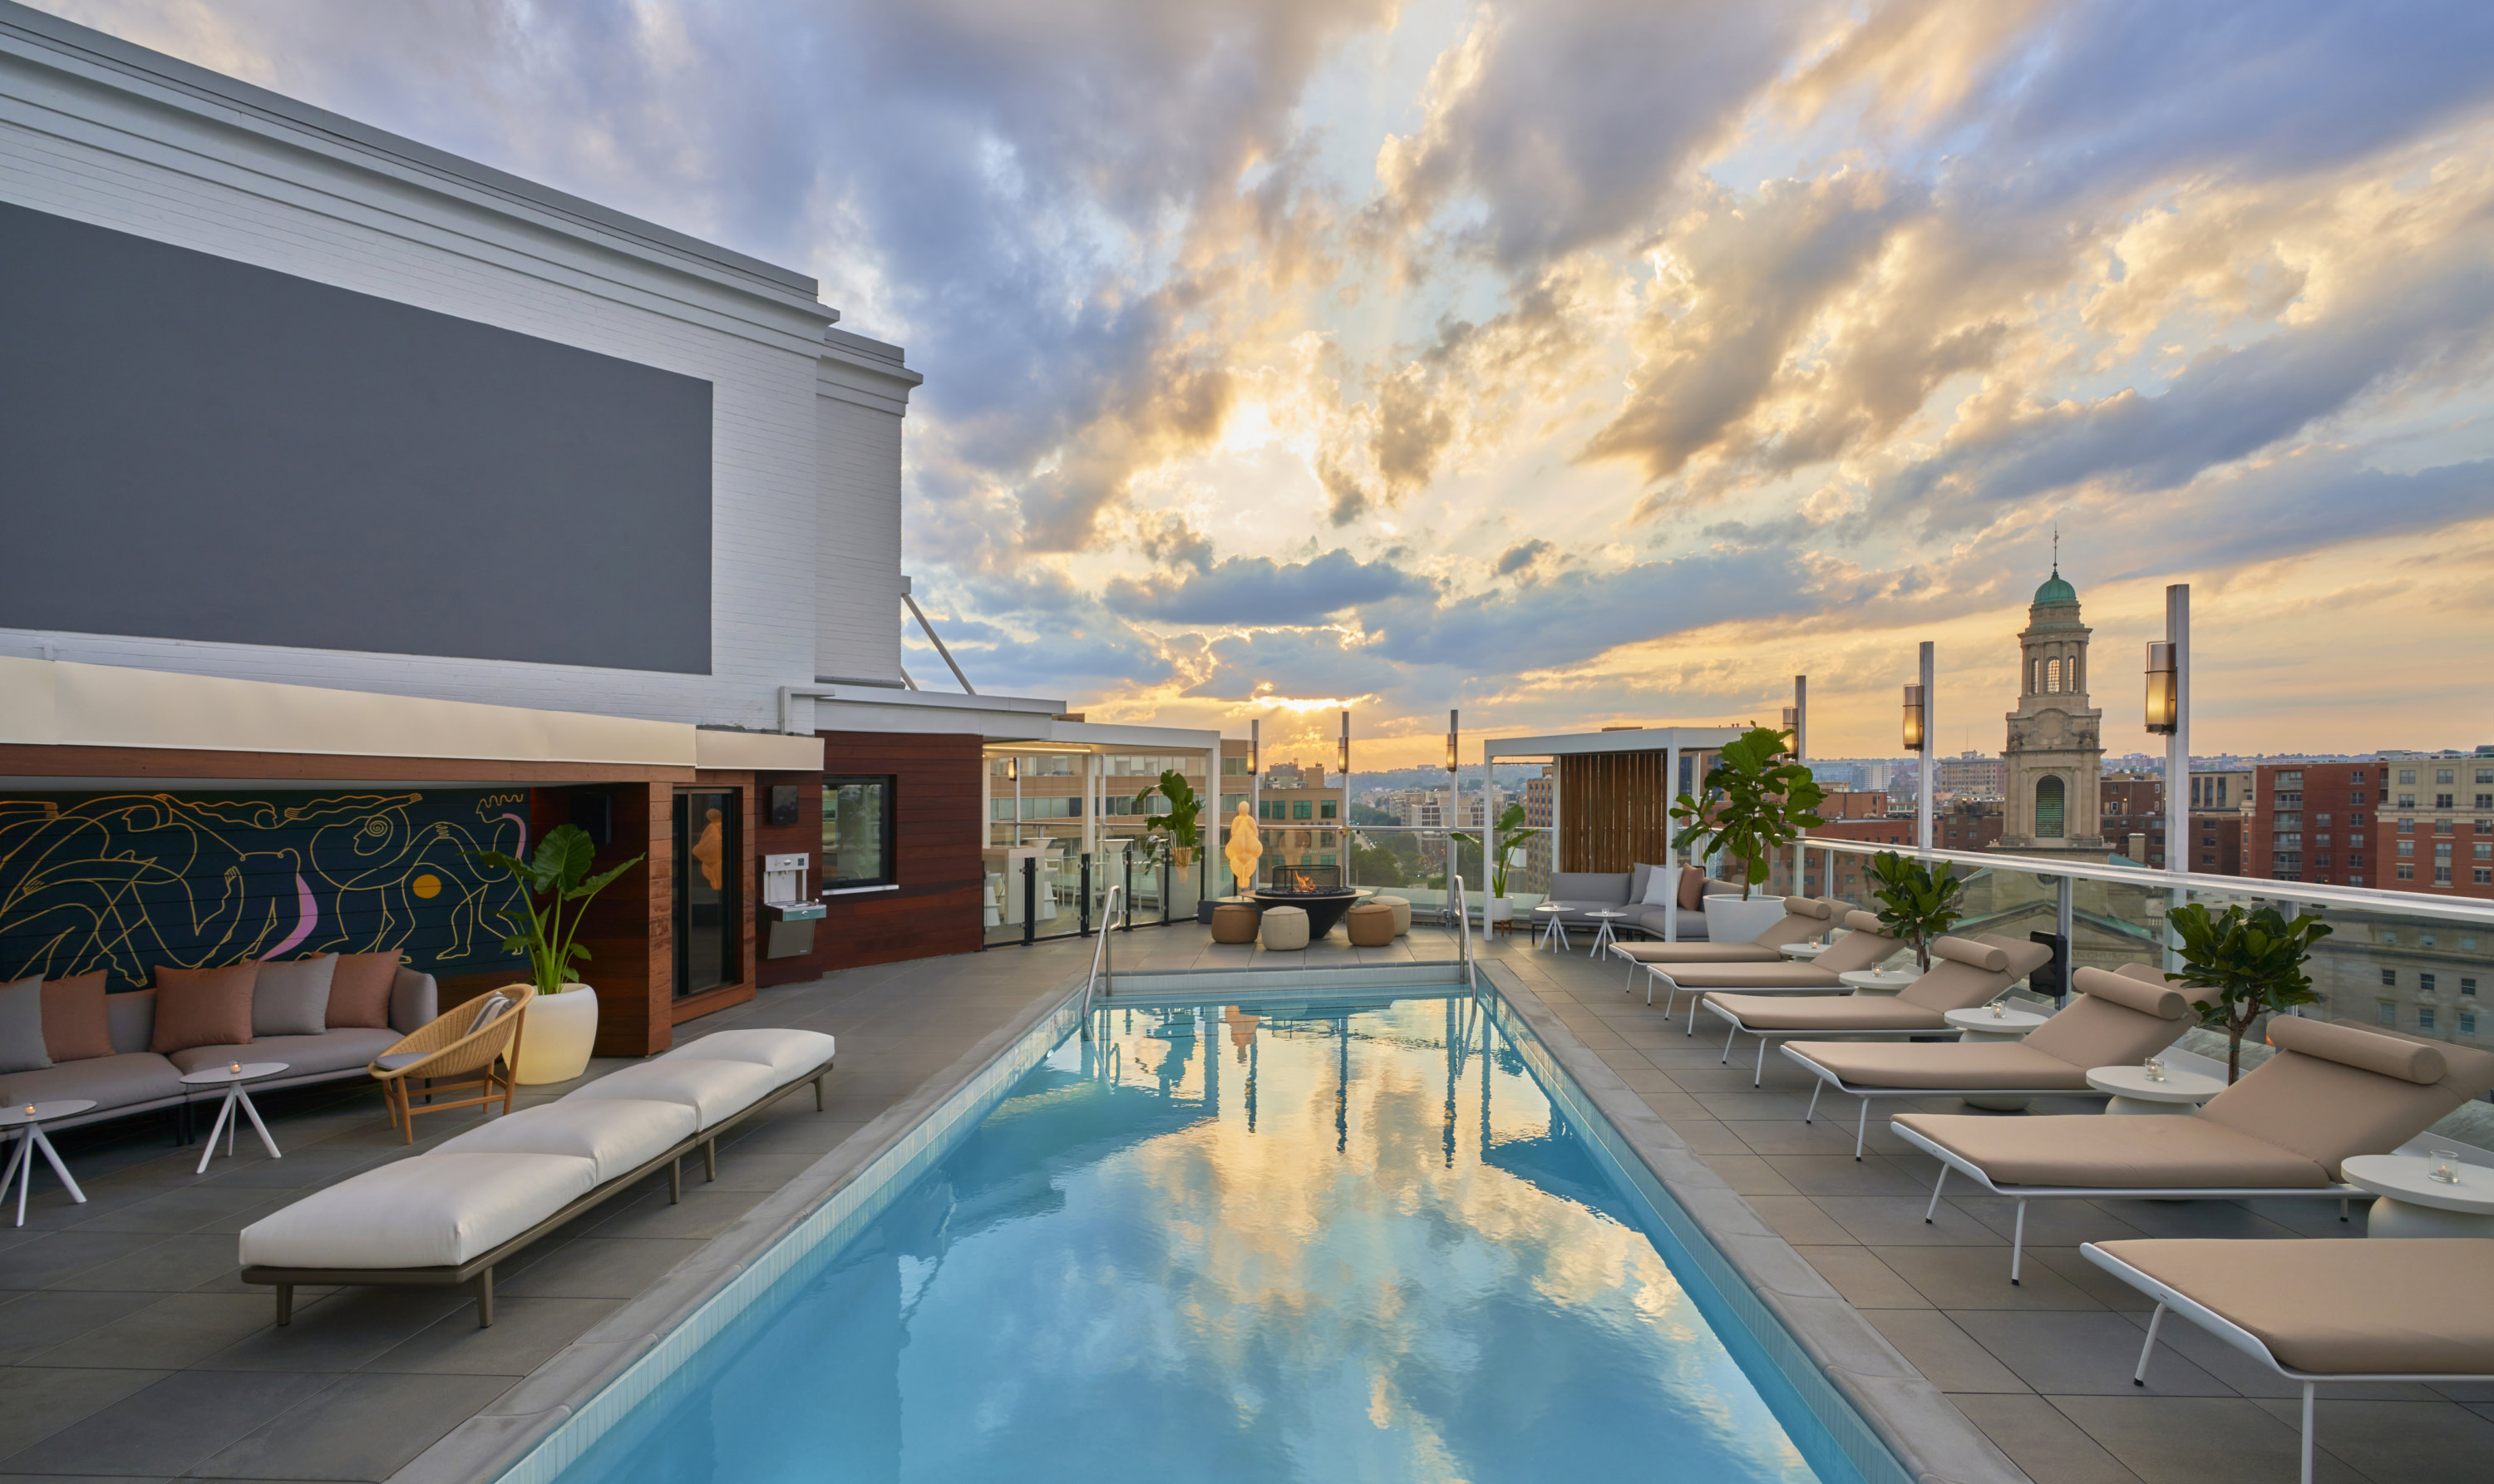 8 DC Hotels With Cool Pools - Washingtonian